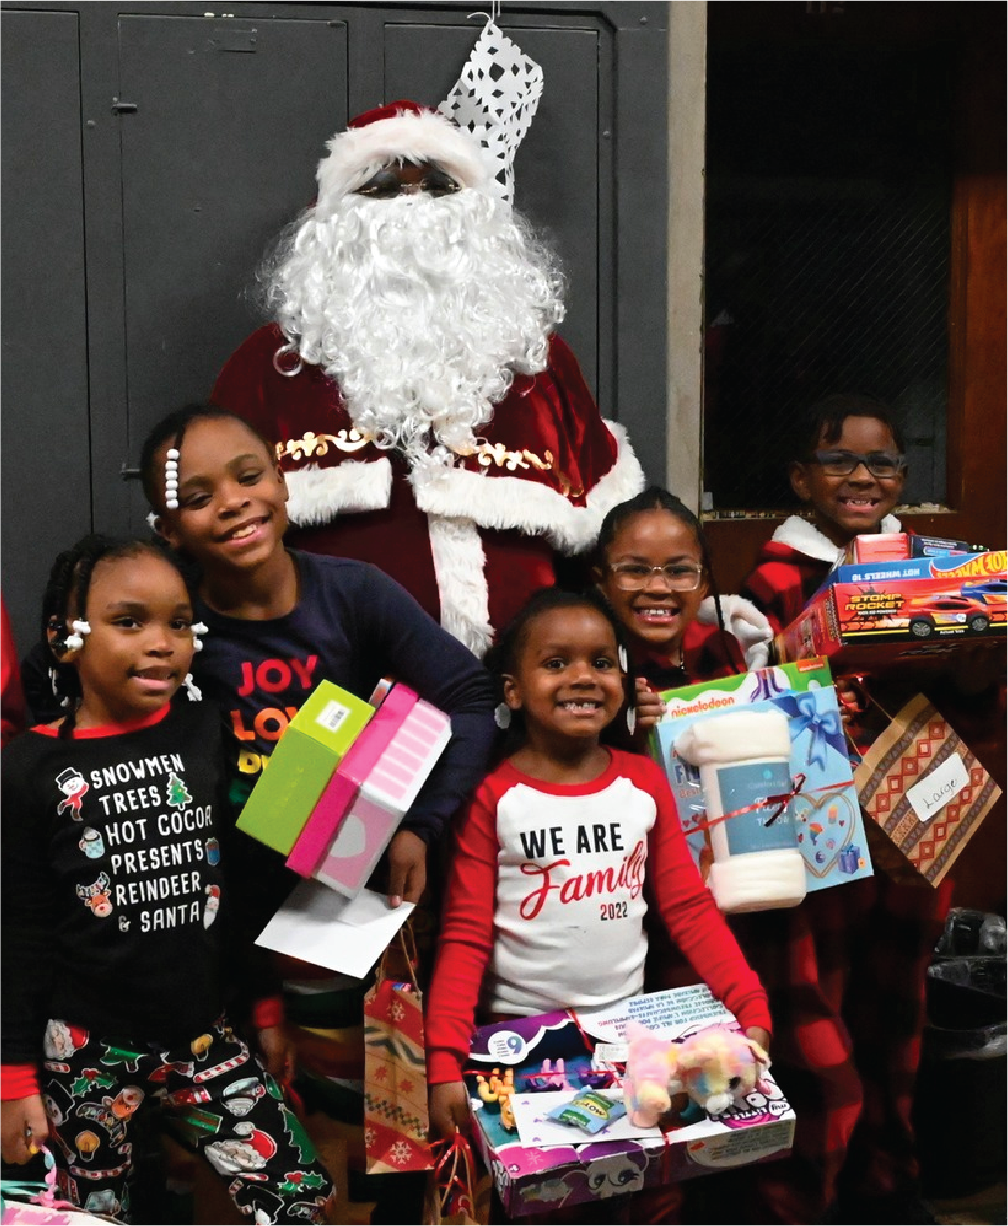 Children gathered around santa claus at a L.I.T. Friday Event